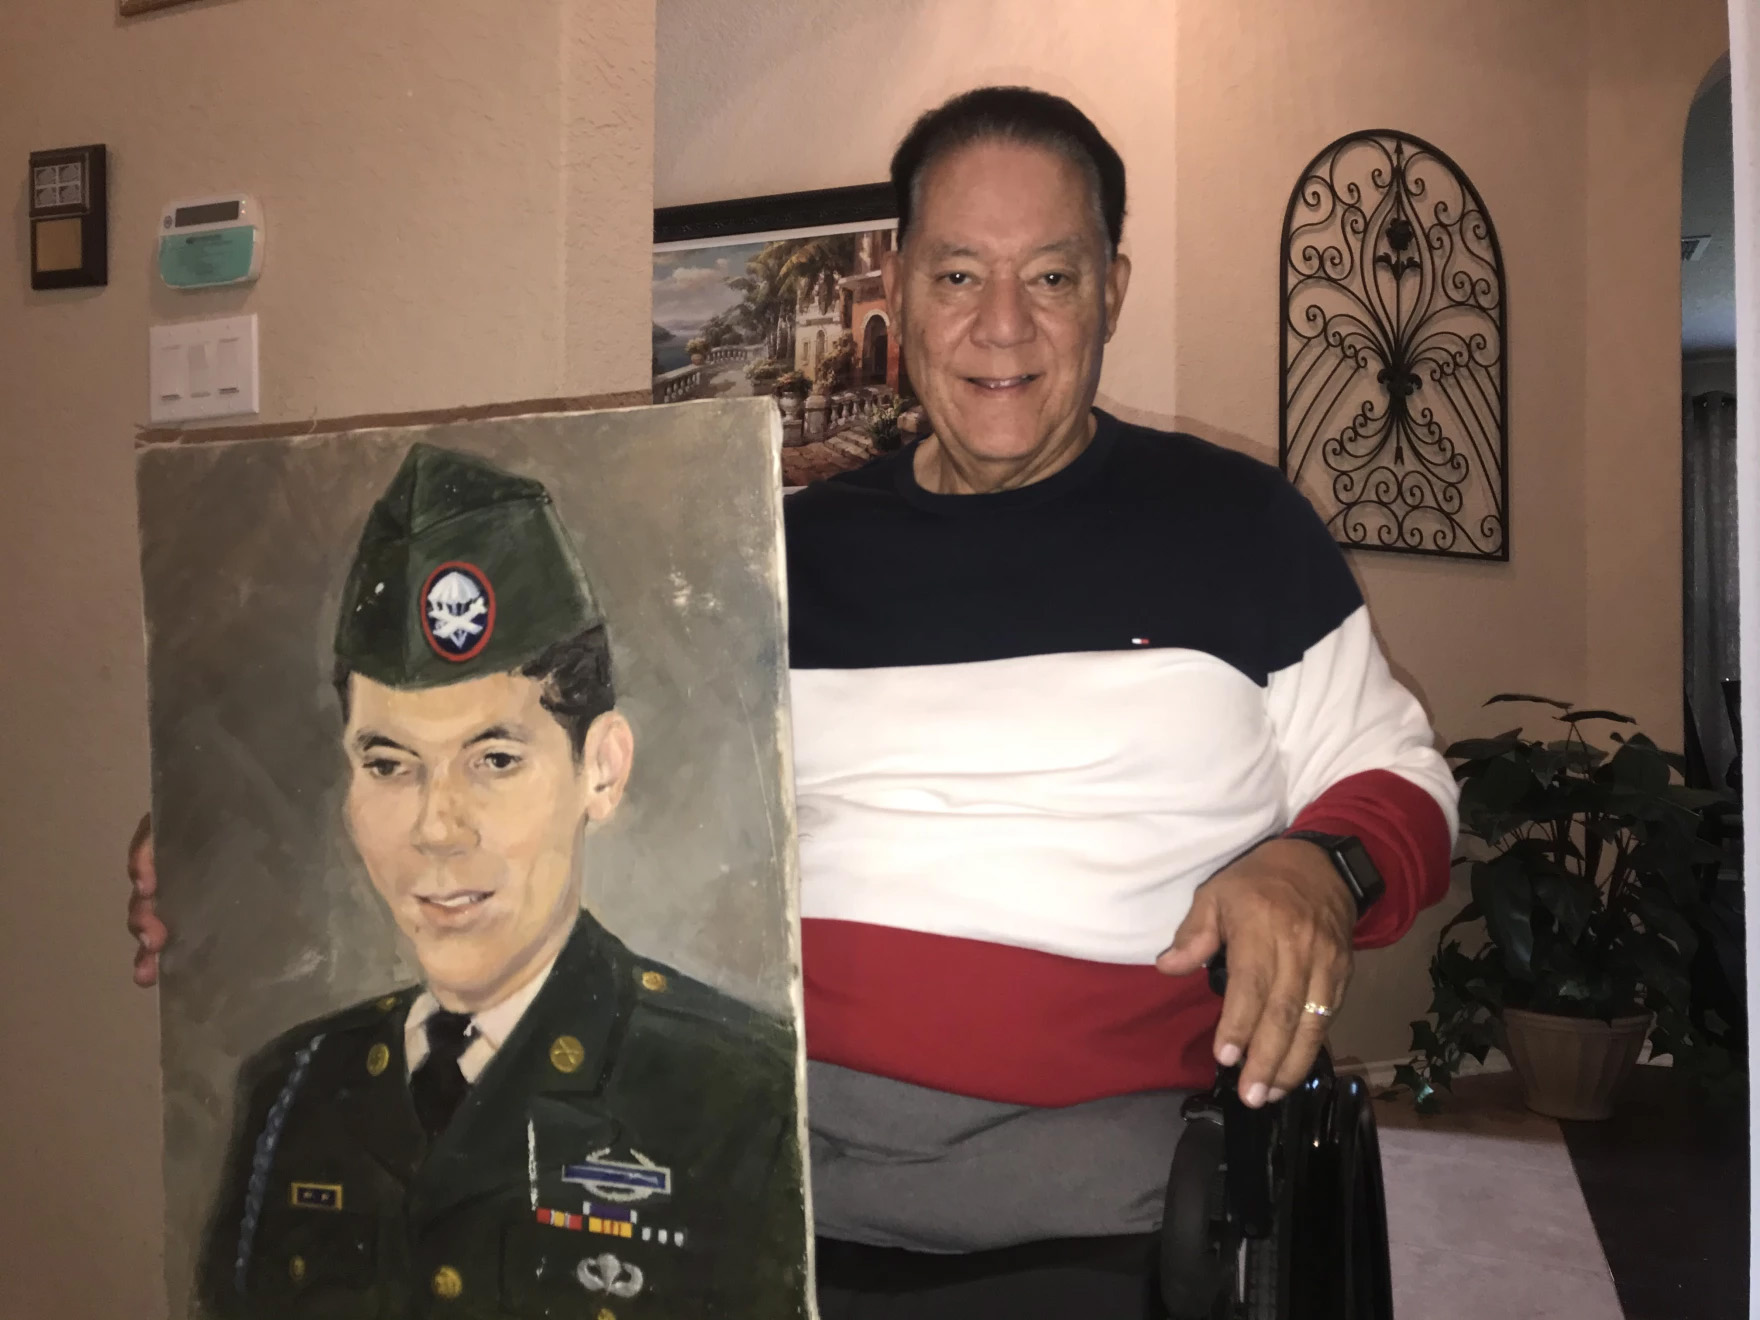 A man faces the camera holding a painting showing the portrait of a military serviceman.